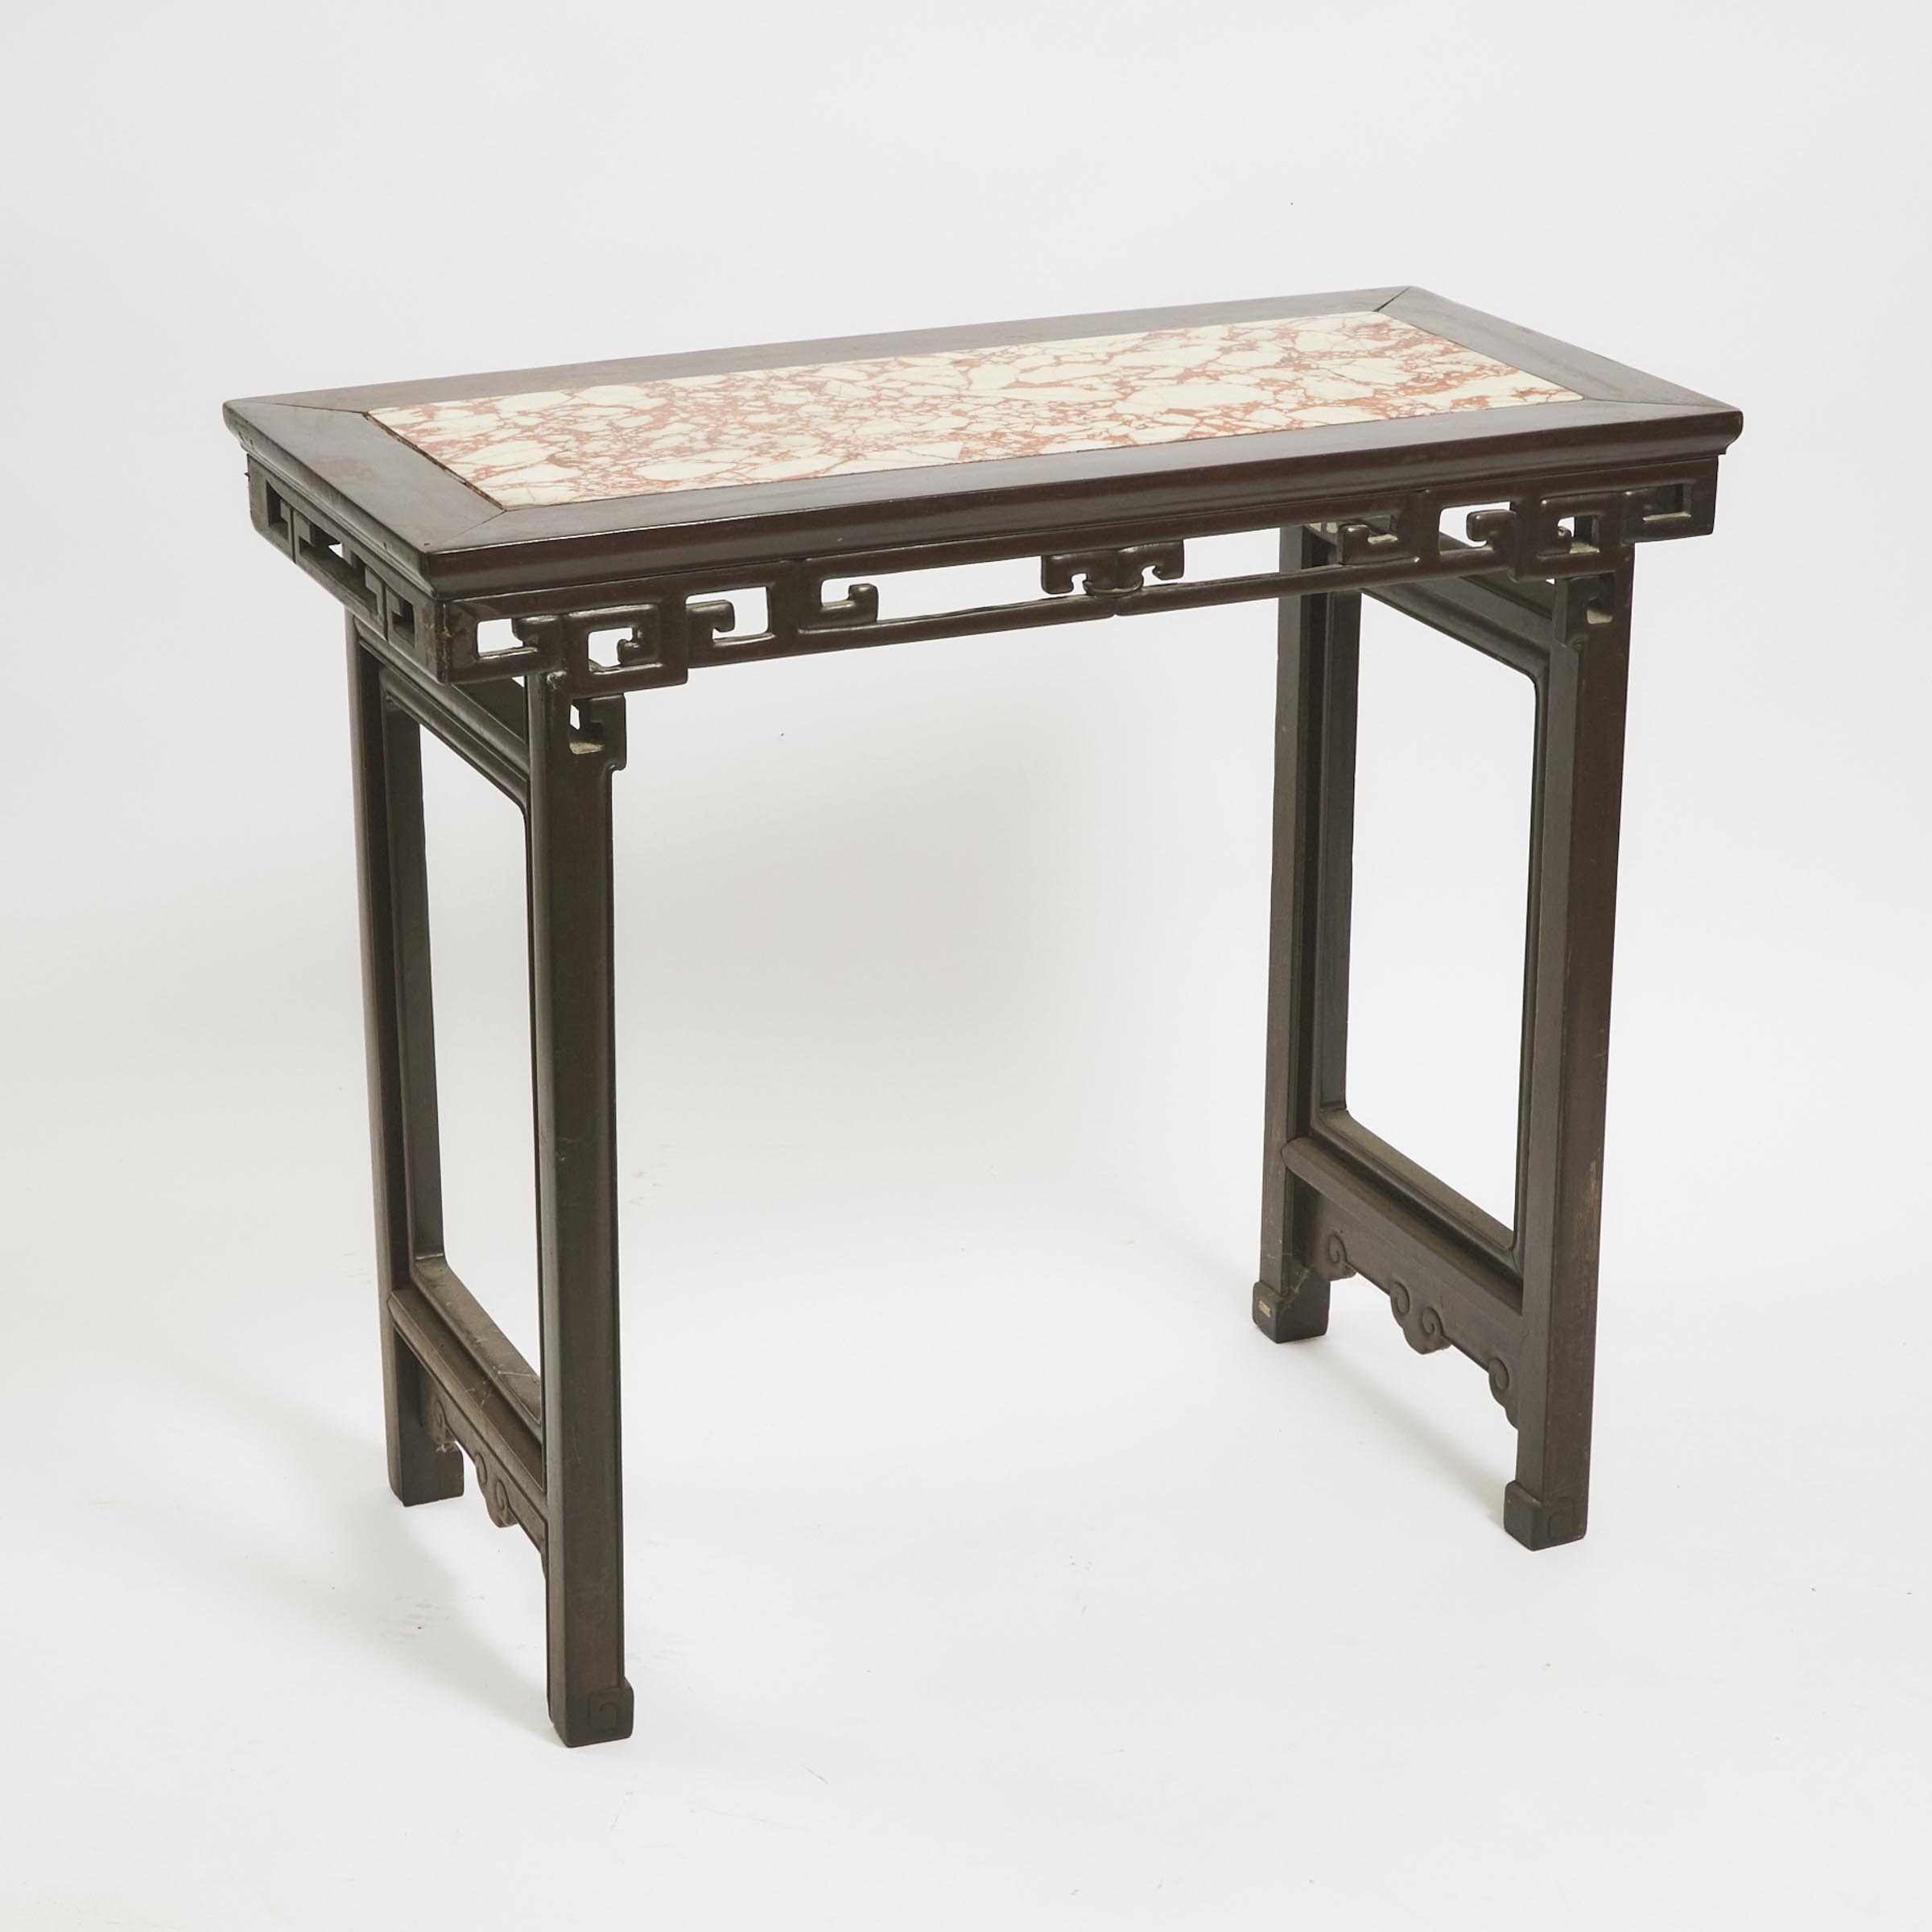 A Chinese Stone-Inset Hardwood Table